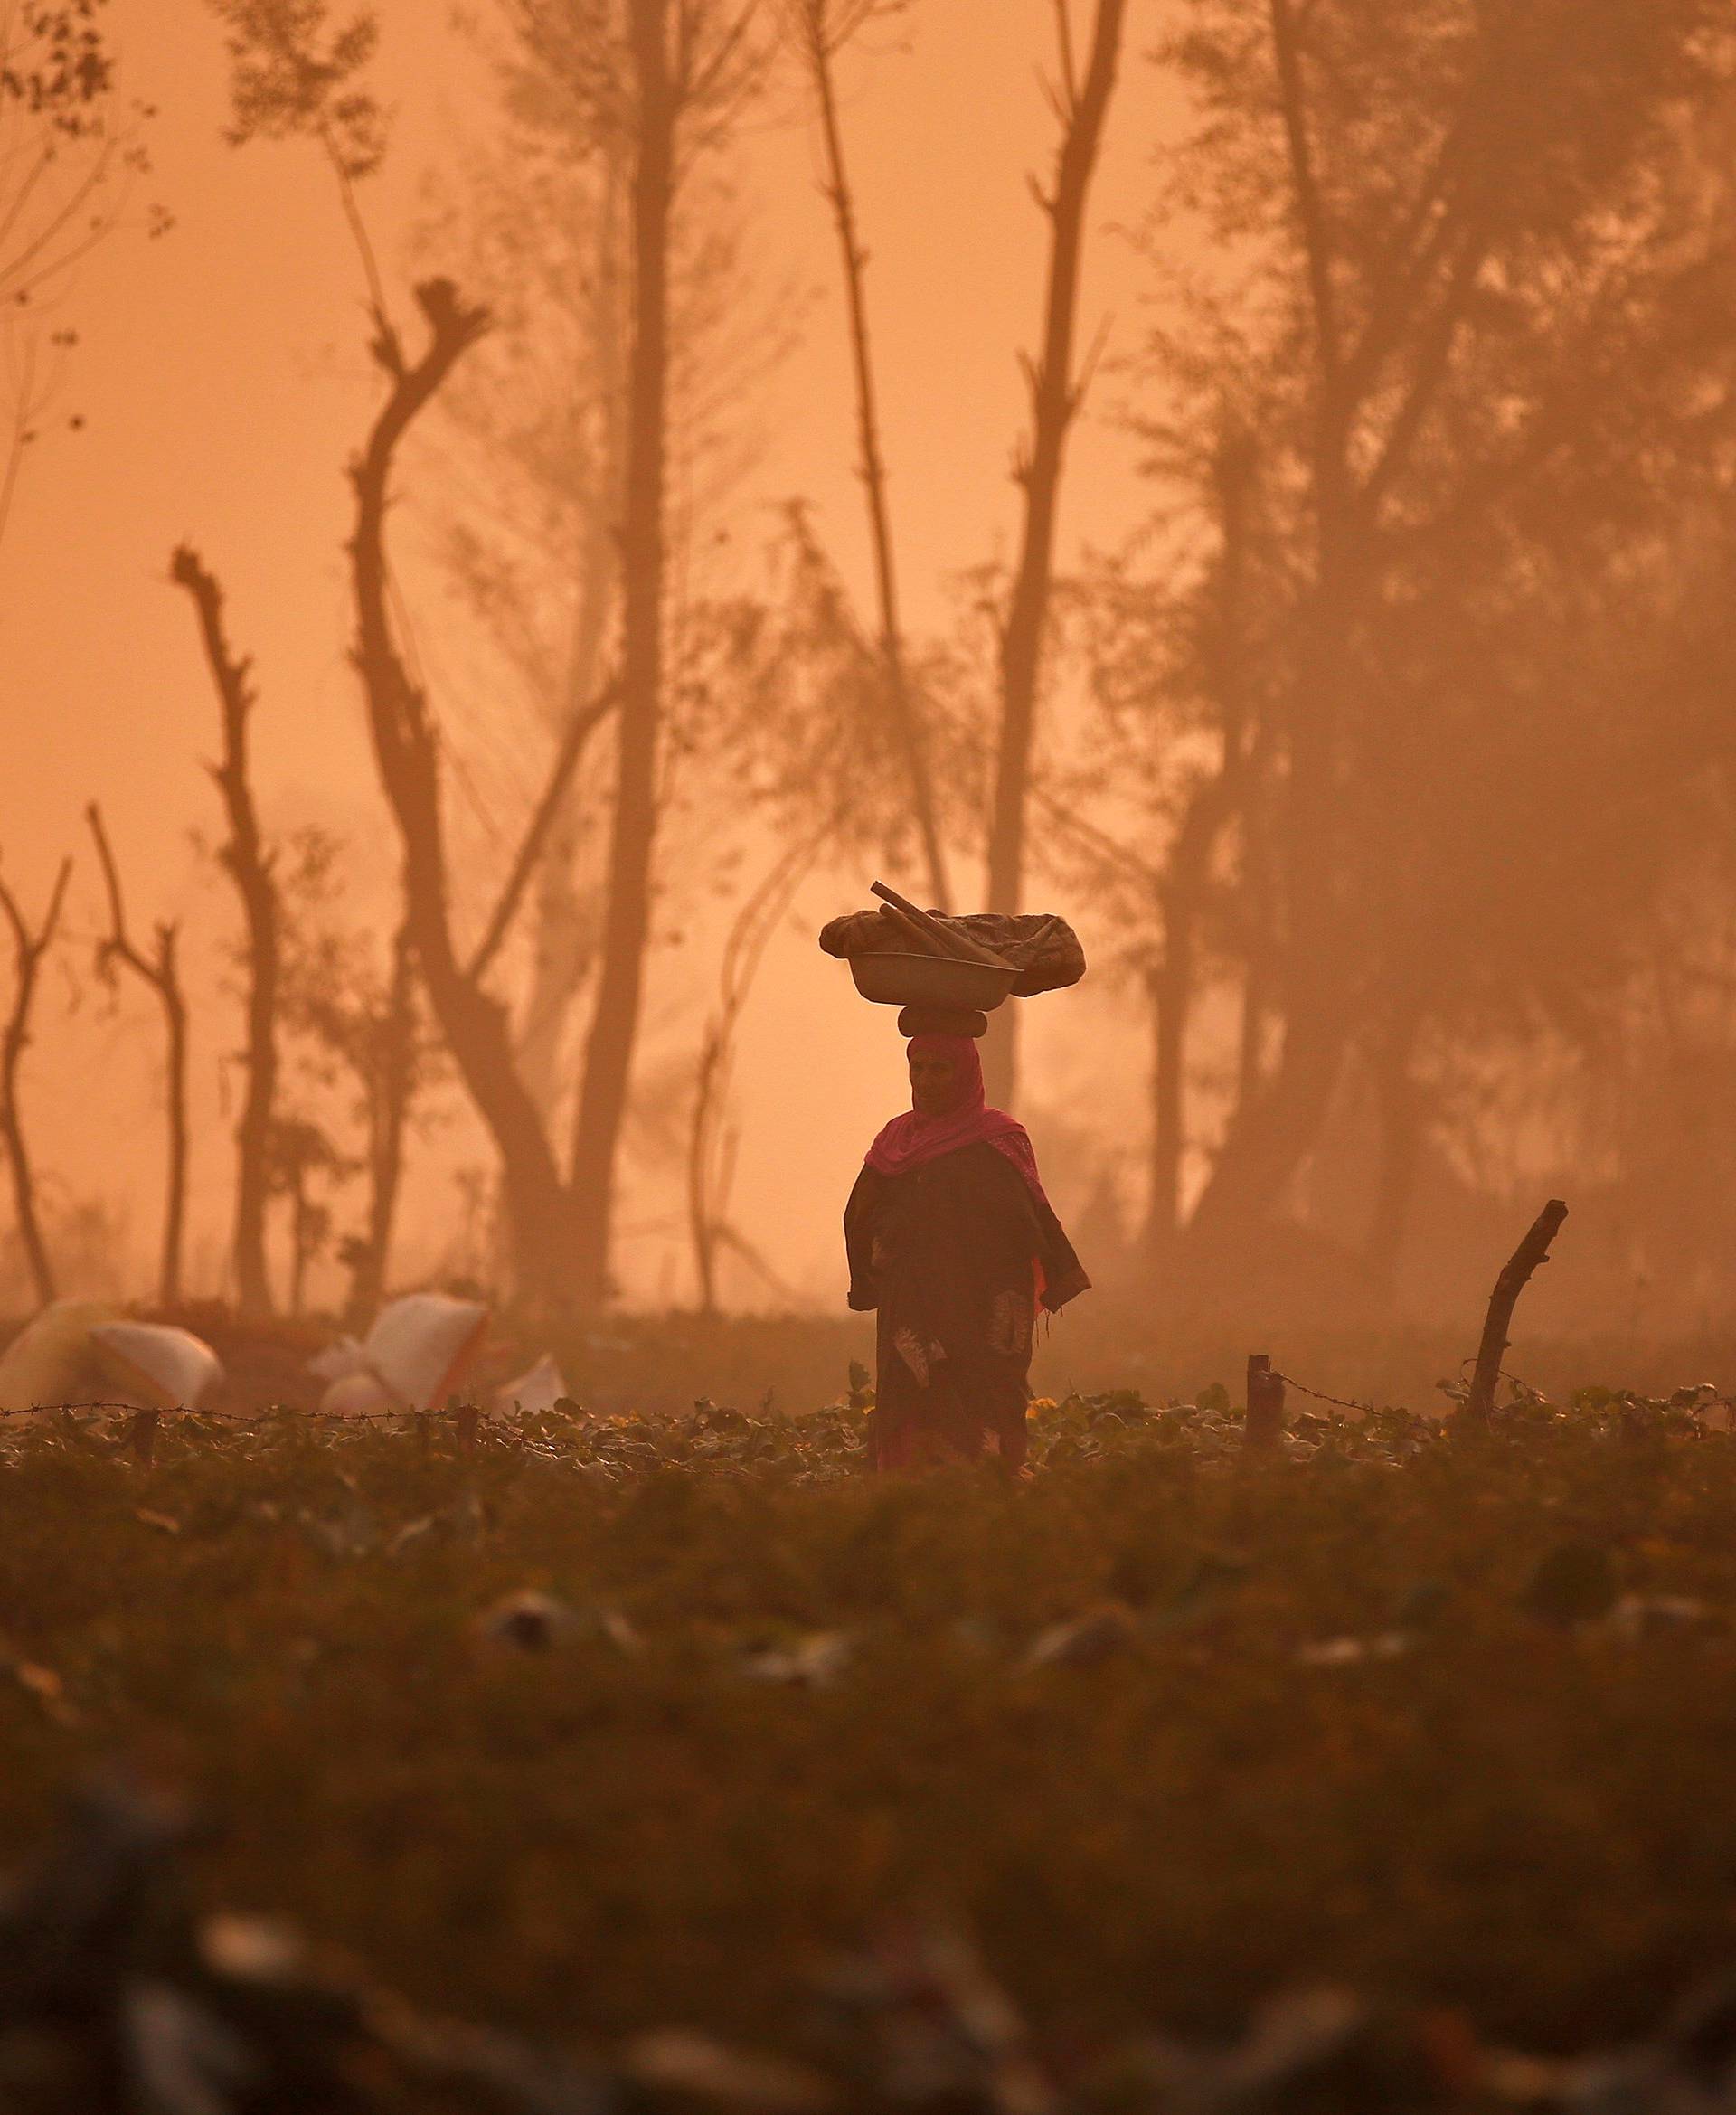 A woman carries a basket on her head through a field of vegetables on a foggy morning on the outskirts of Srinagar